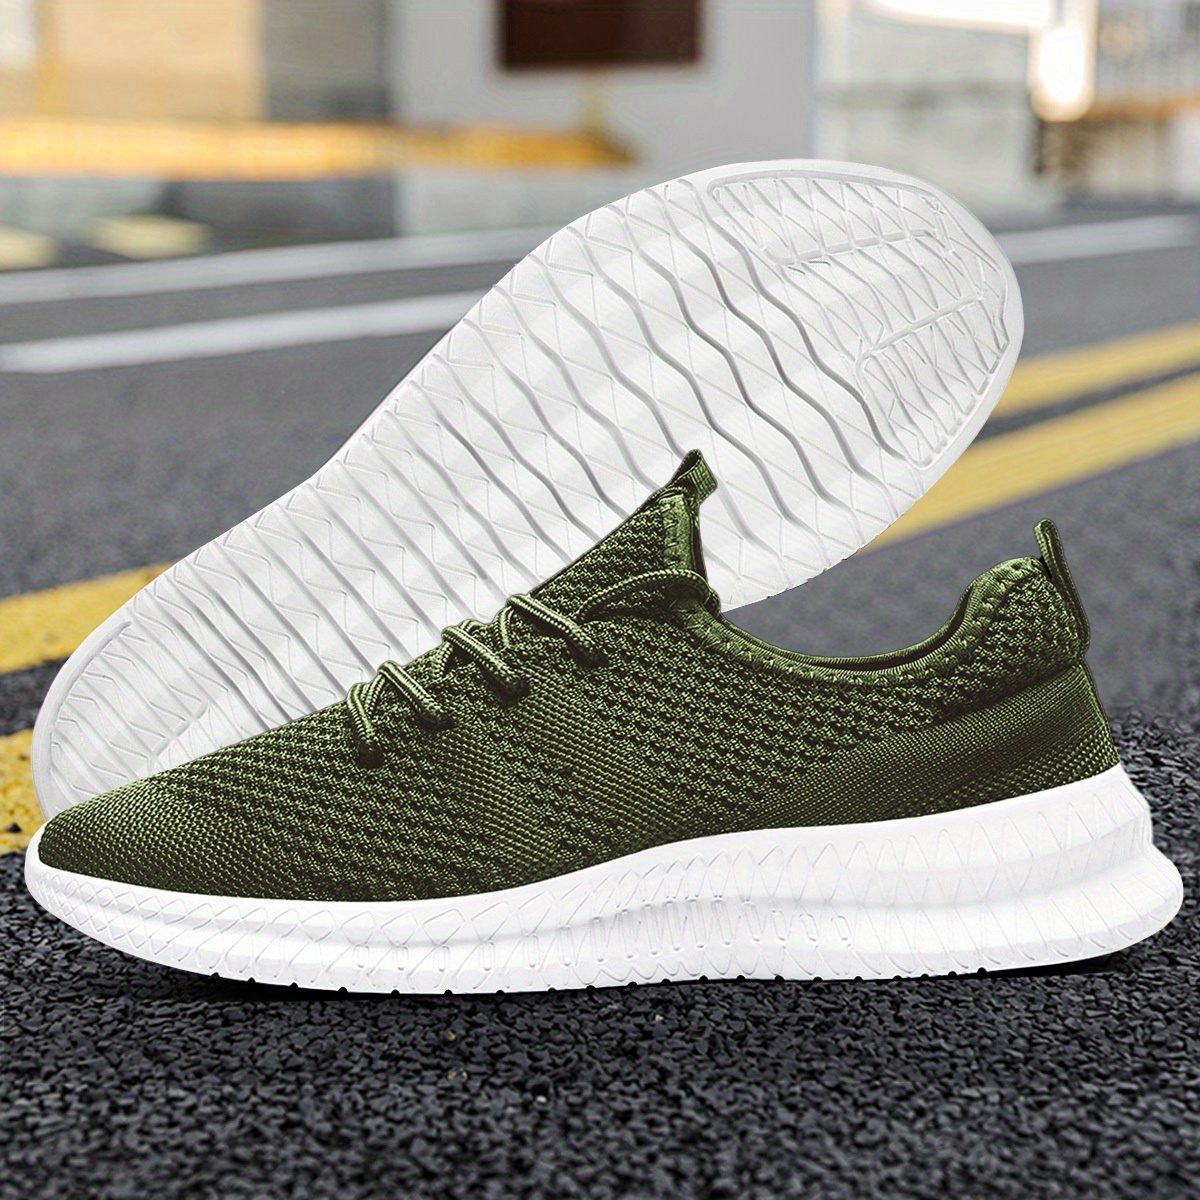 mens trendy breathable lace up knit sneakers with assorted colors casual outdoor running walking shoes details 26